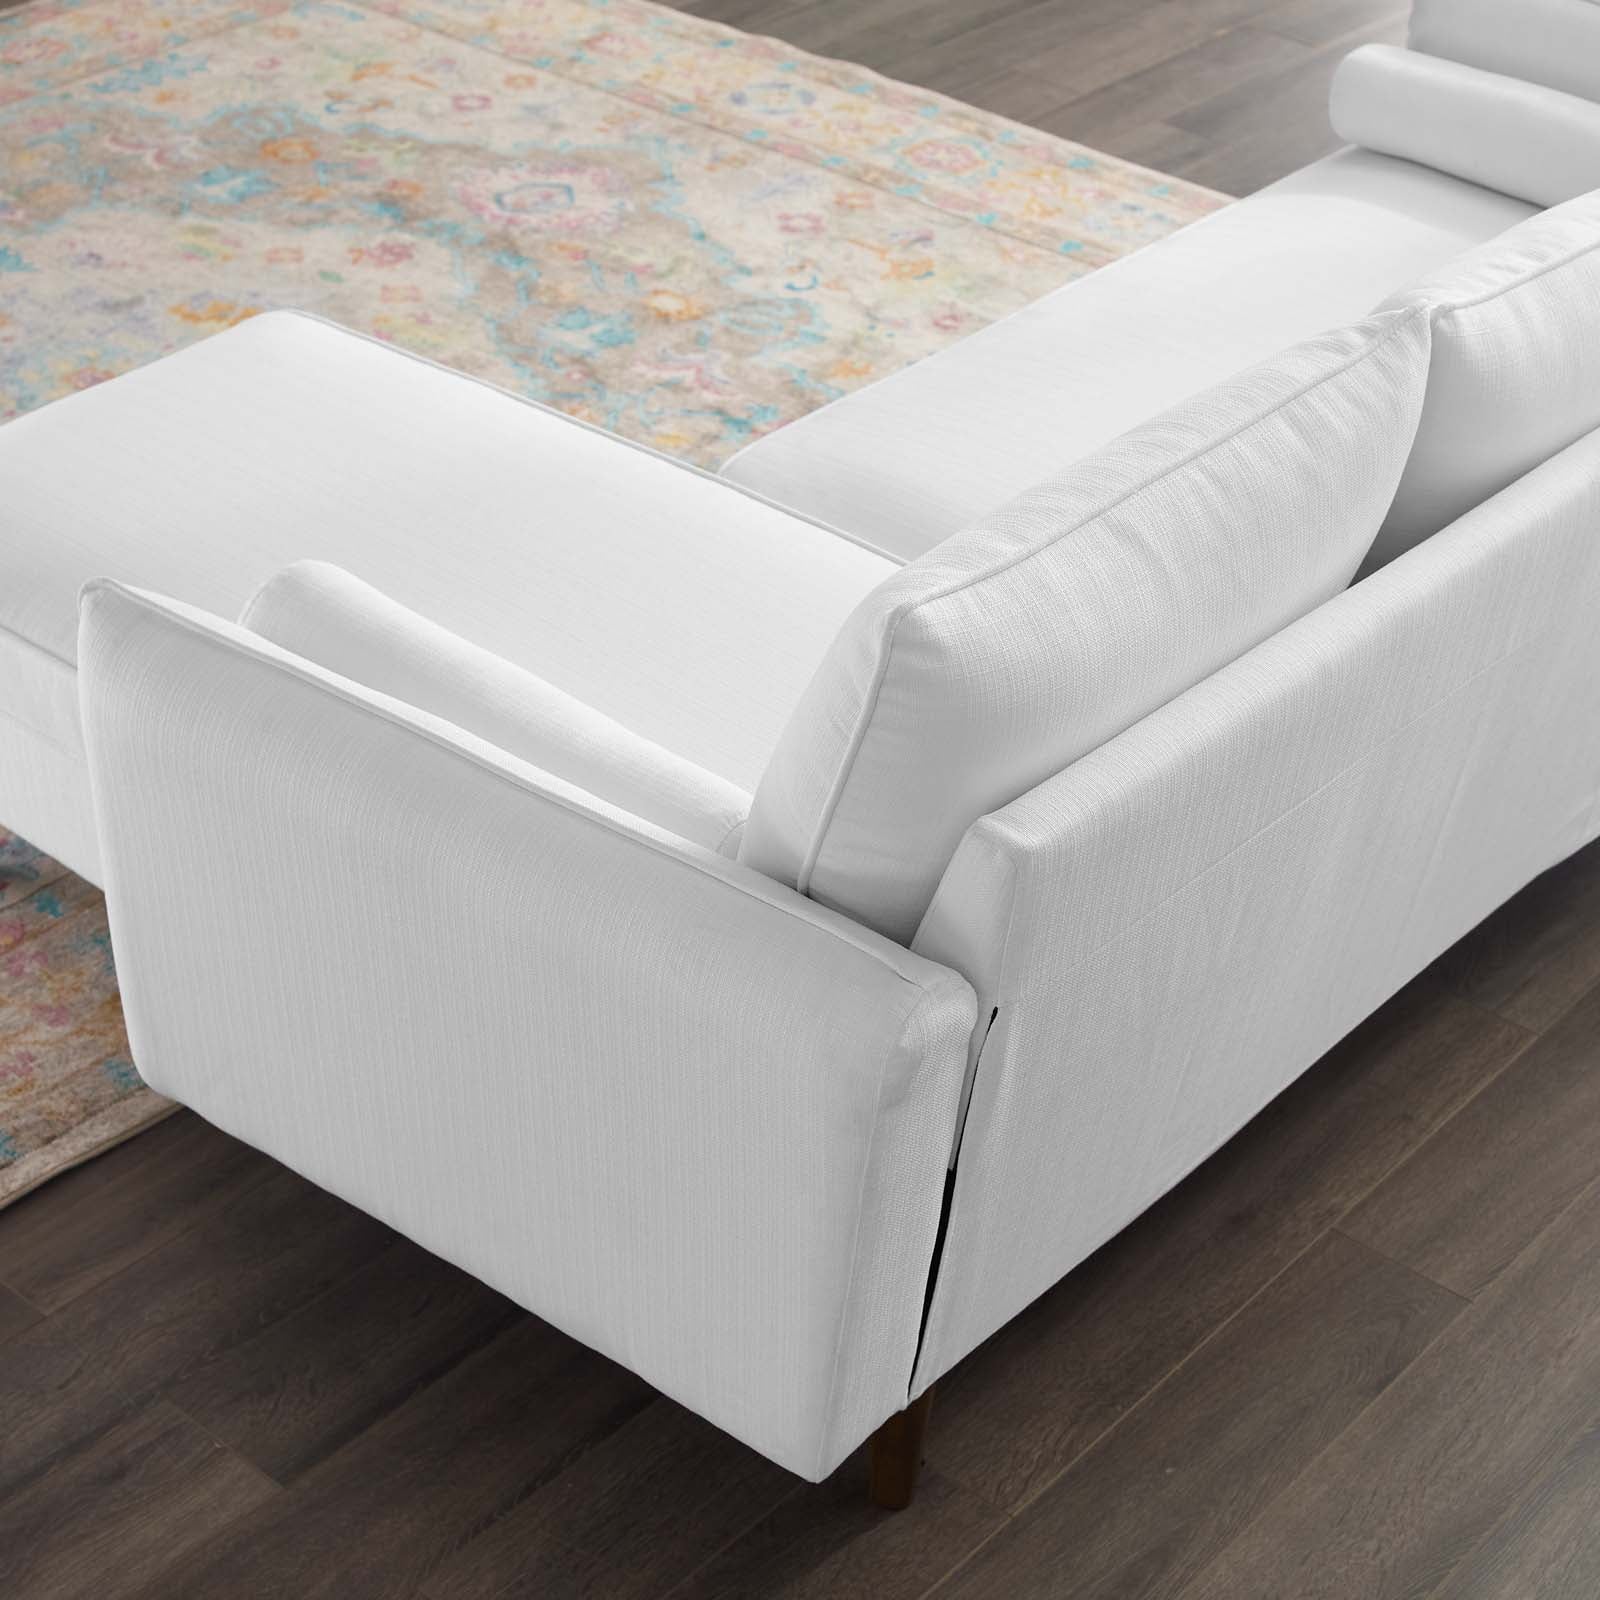 Modway Sectional Sofas - Revive Upholstered Right or Left Sectional Sofa White